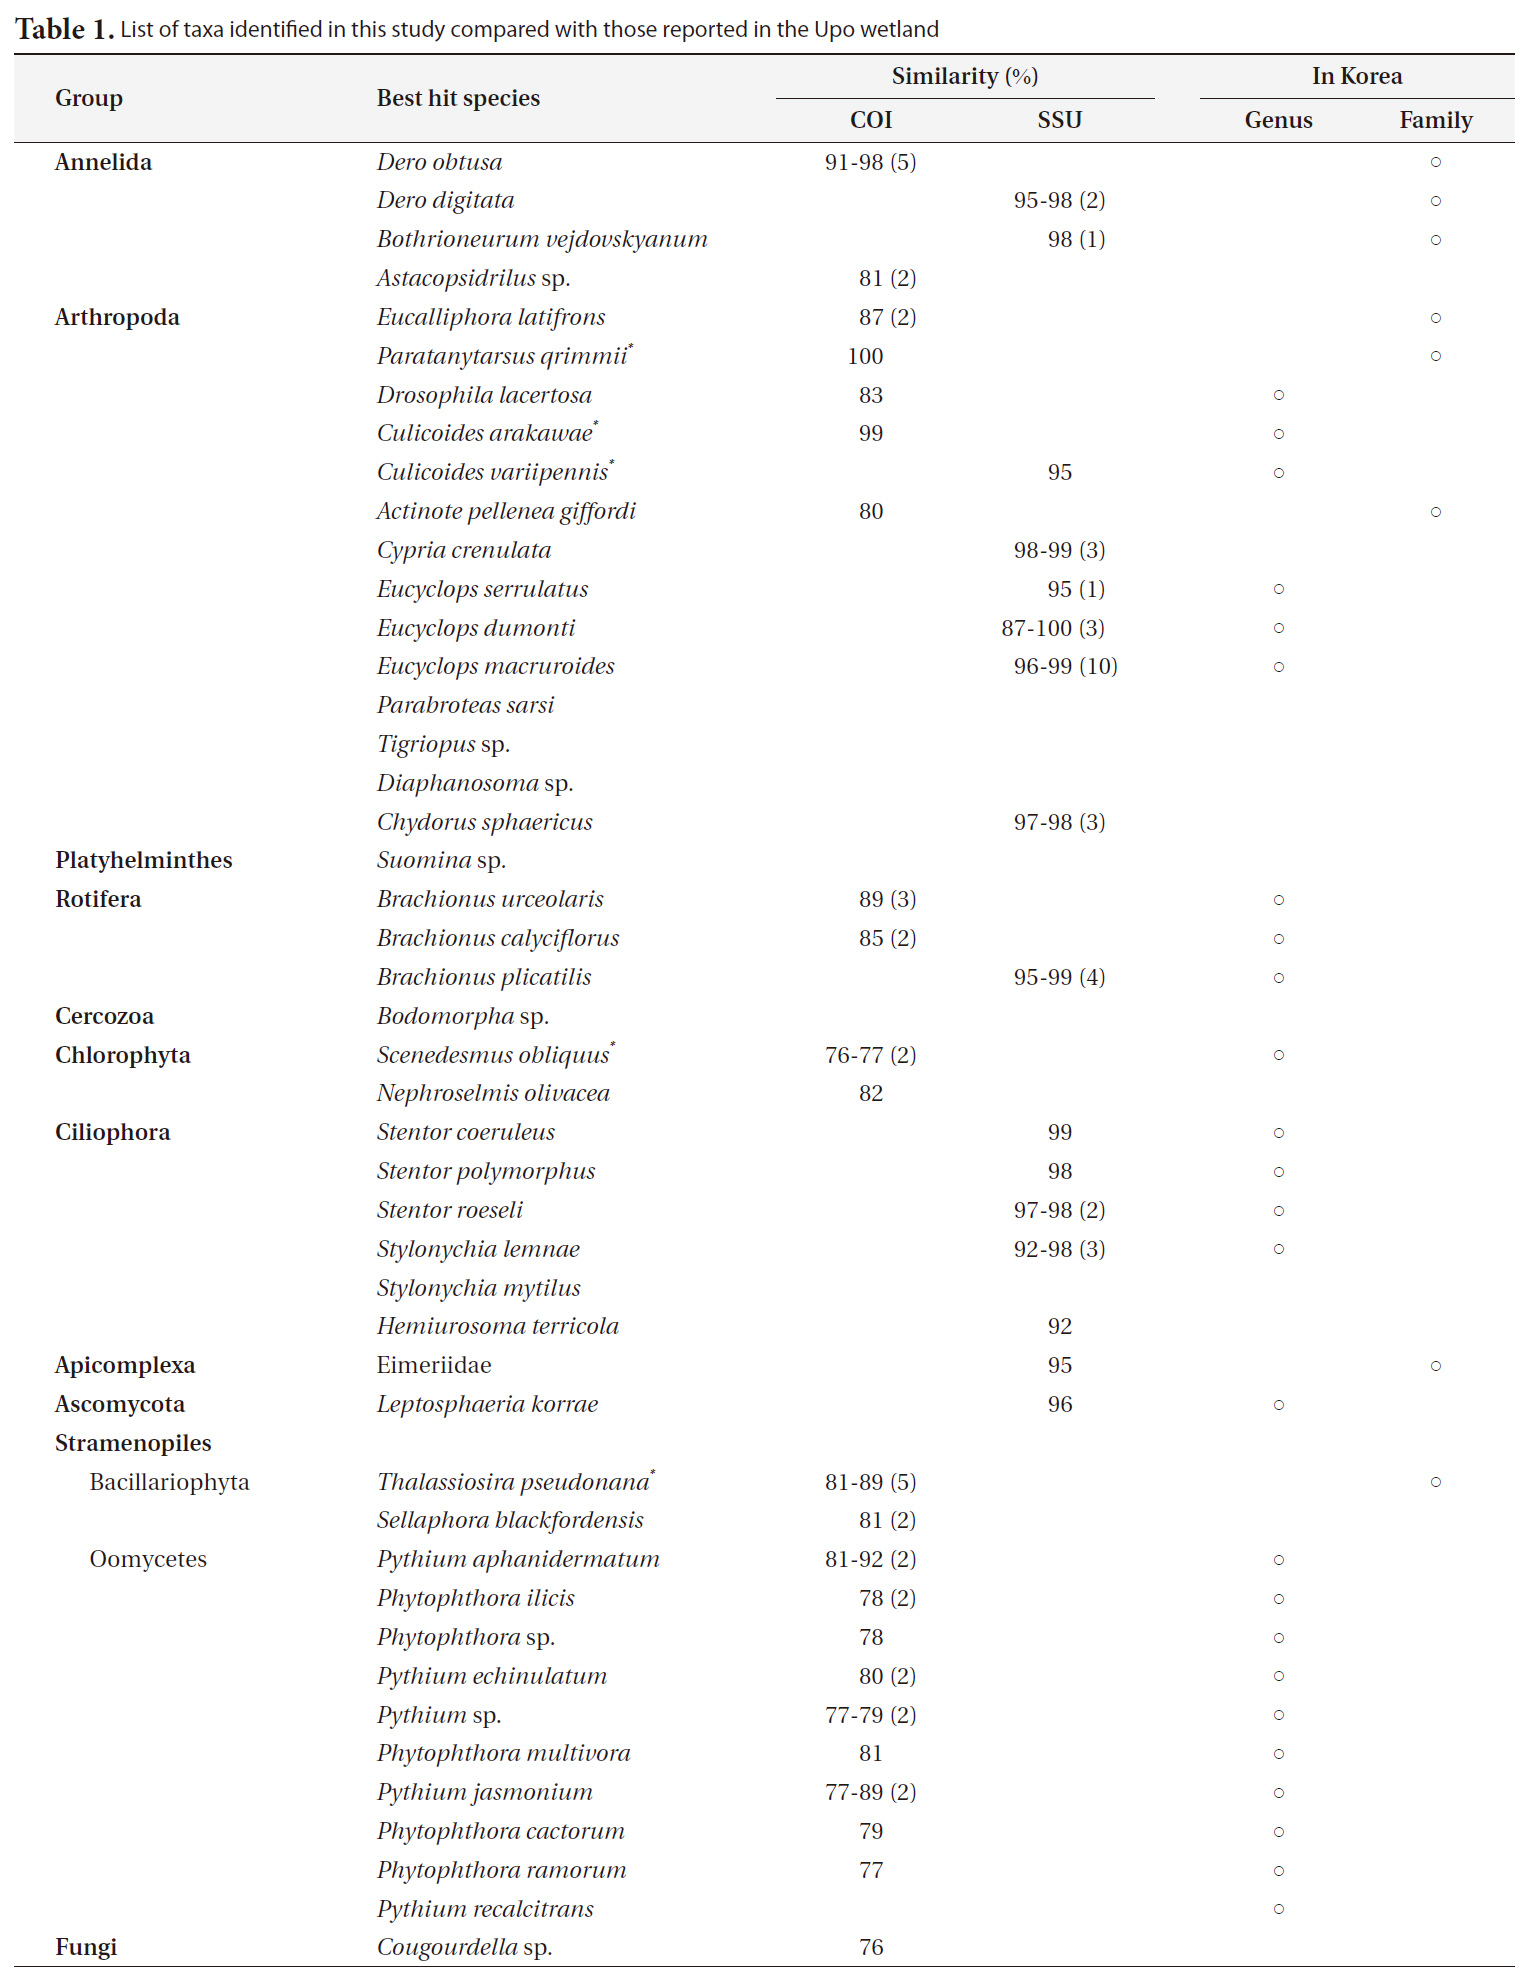 List of taxa identified in this study compared with those reported in the Upo wetland